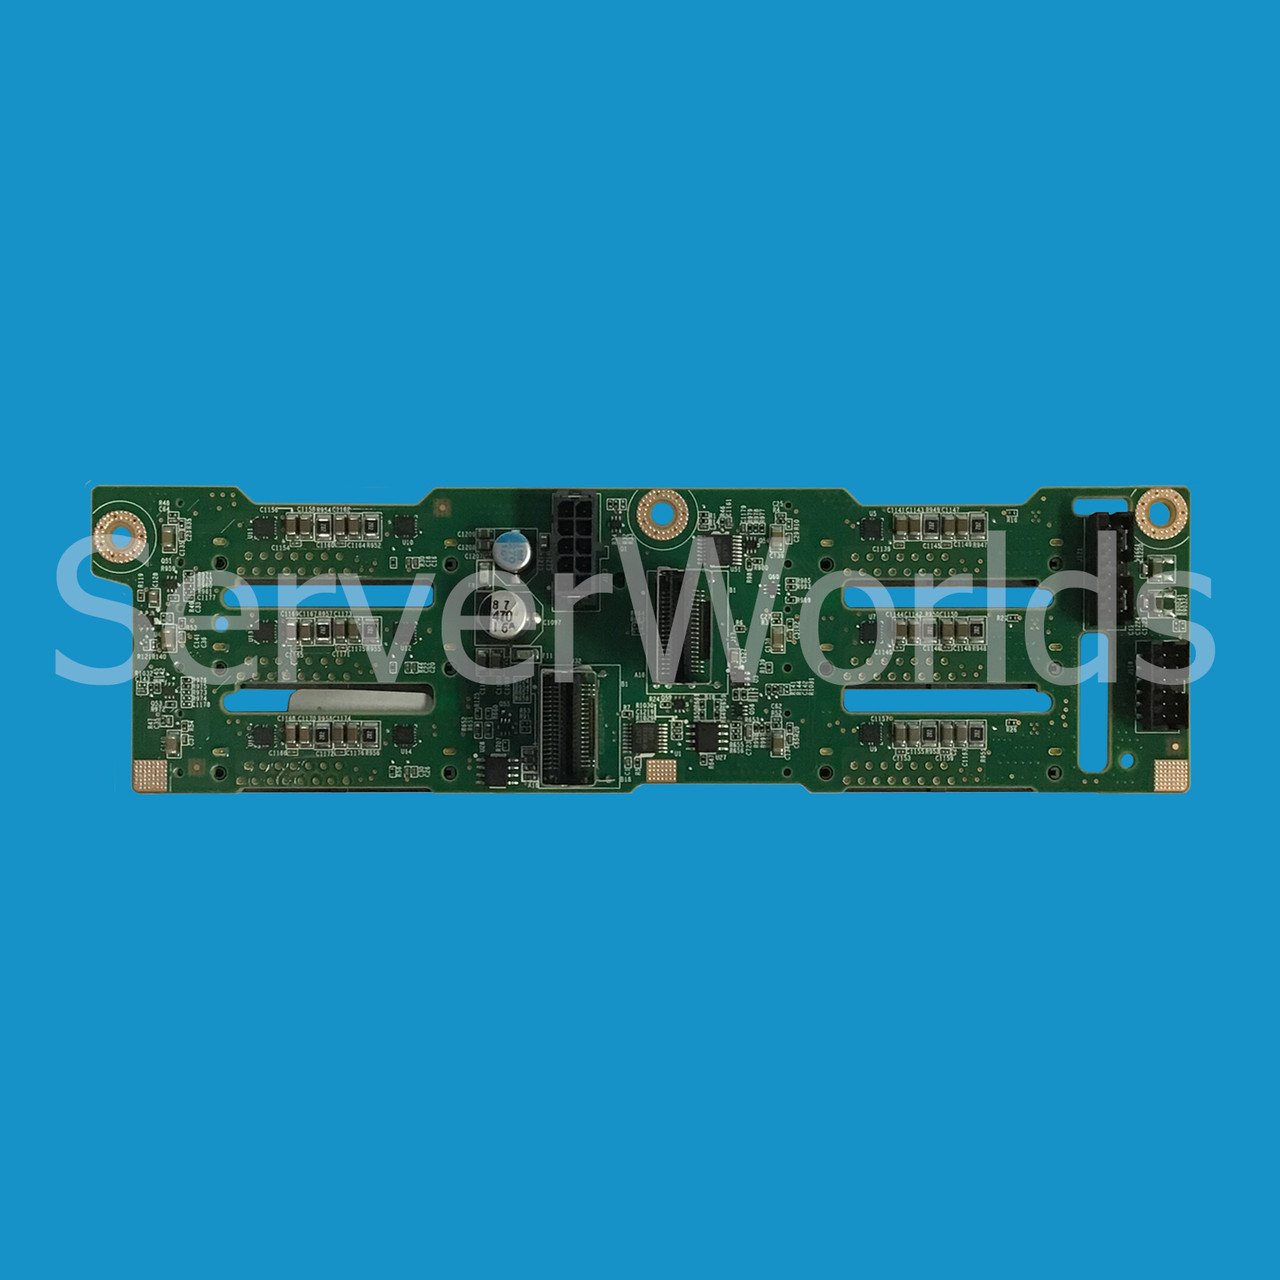 HPe 843308-001 Apollo 4200 G9 Backplane Assembly 834304-001